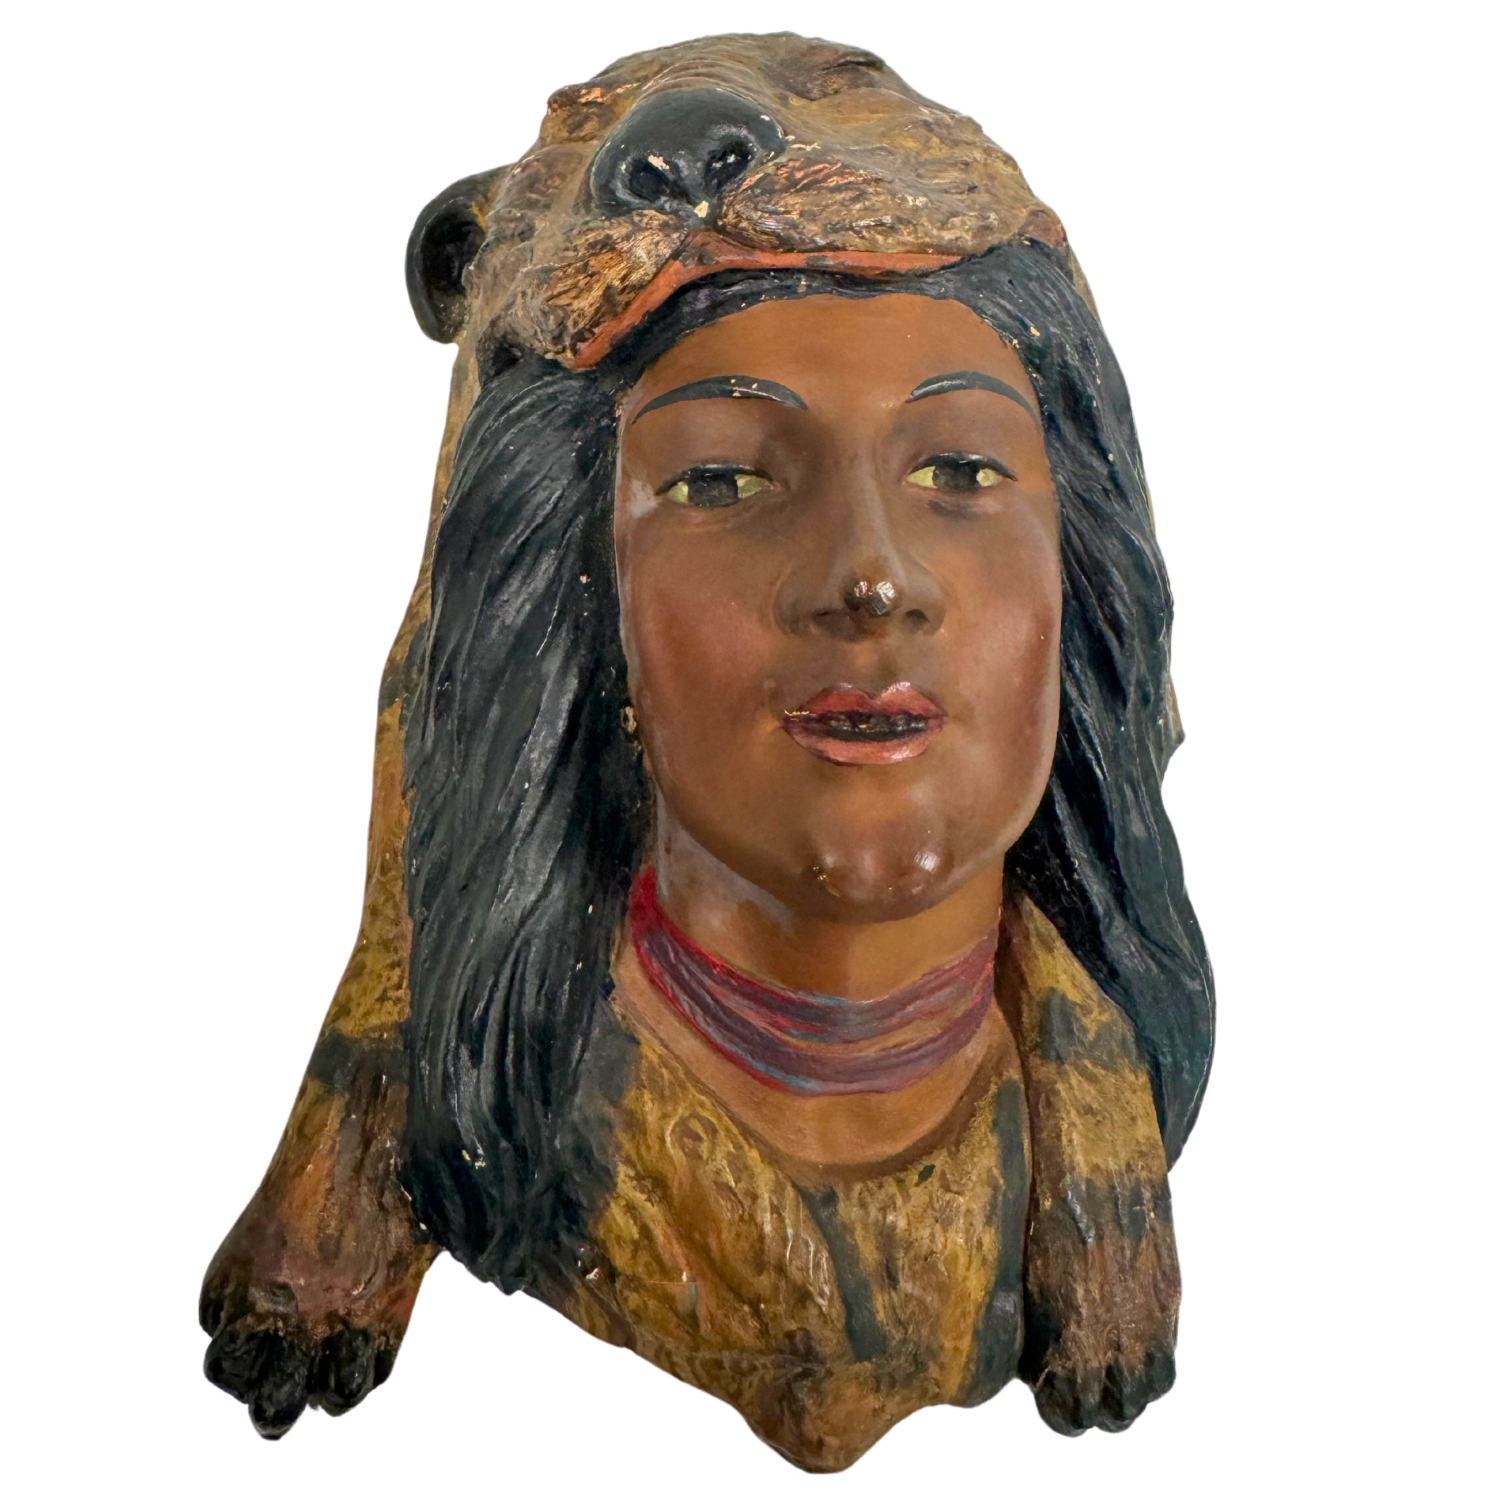 VINTAGE CHALKWARE NATIVE AMERICAN INDIAN CHIEF TOBACCO STORE WALL BUST - 1930's